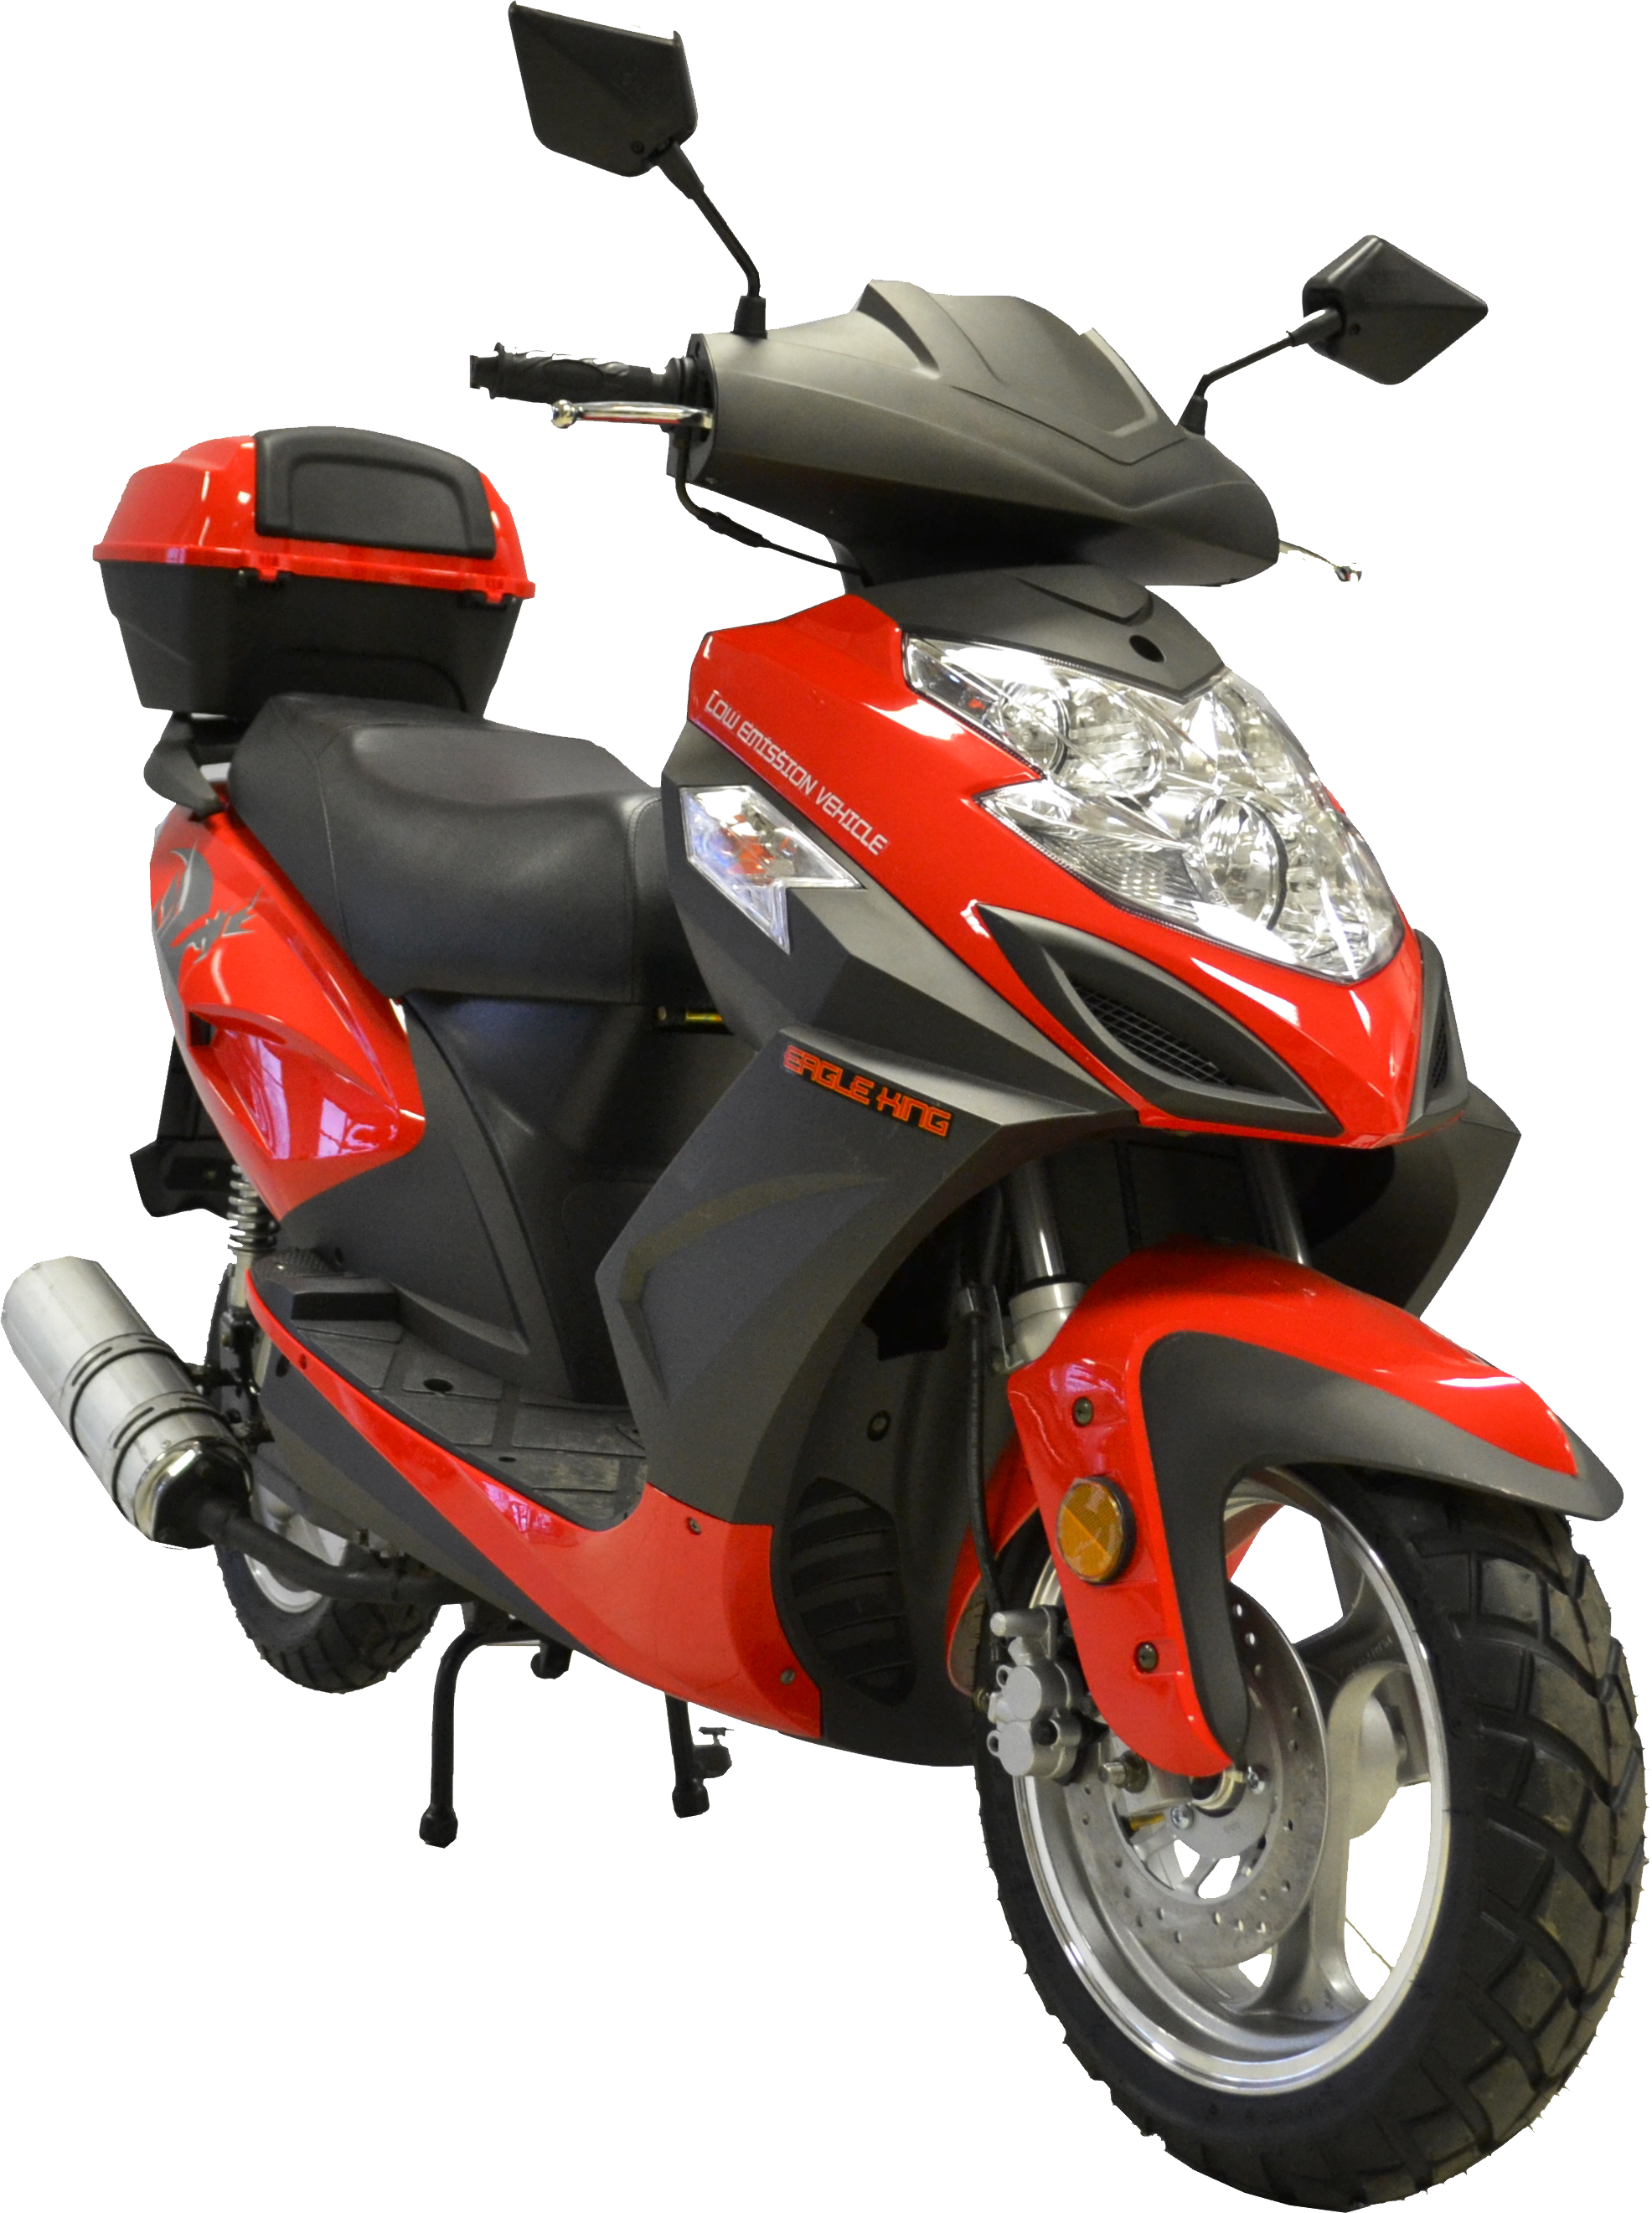 Scooter Png Image - Scooter, Transparent background PNG HD thumbnail